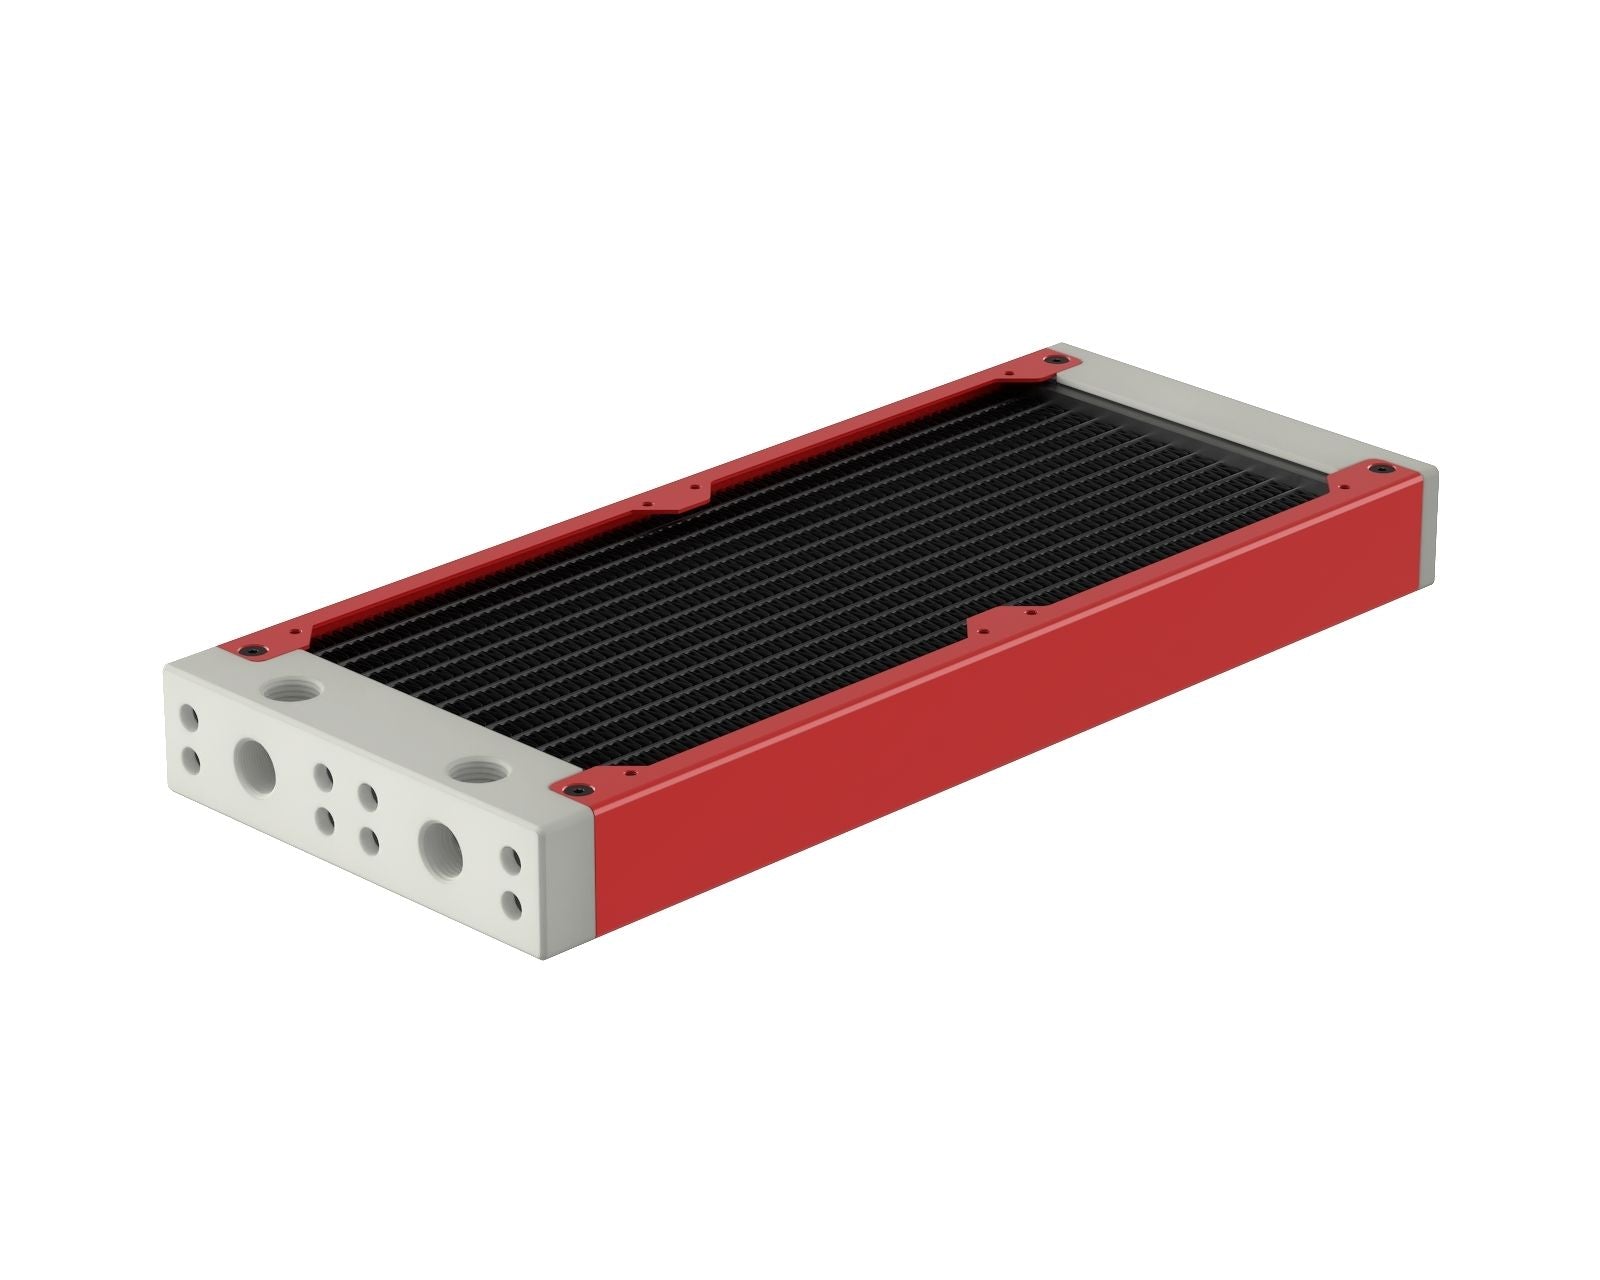 PrimoChill 240SL (30mm) EXIMO Modular Radiator, White POM, 2x120mm, Dual Fan (R-SL-W24) Available in 20+ Colors, Assembled in USA and Custom Watercooling Loop Ready - Razor Red